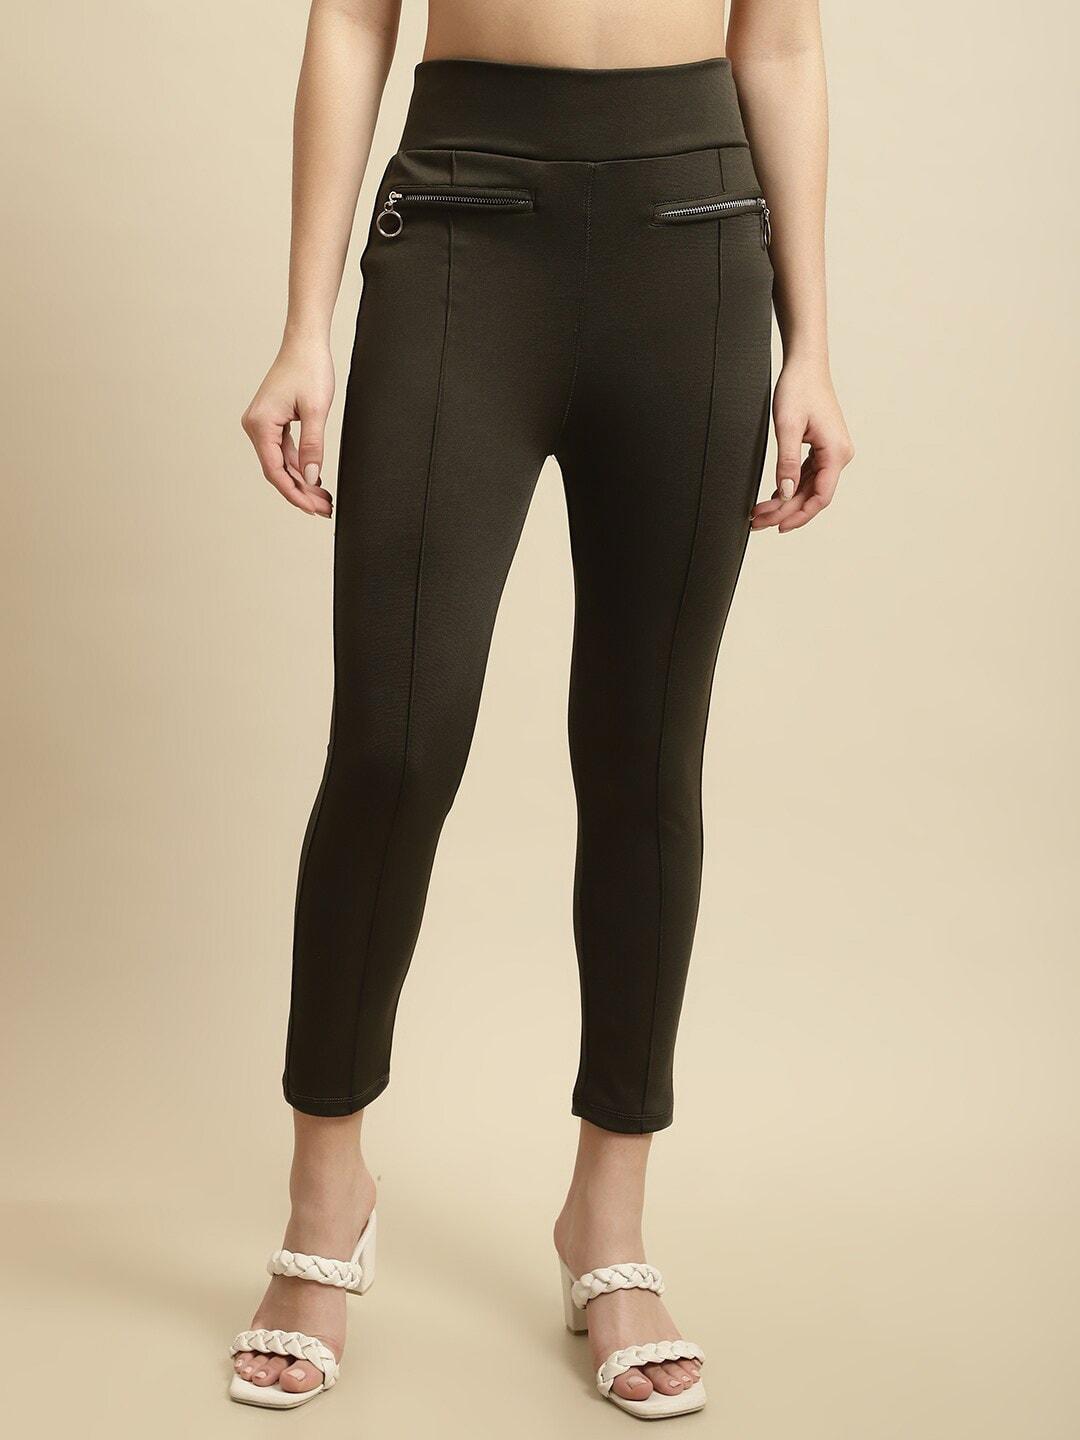 tag-7-women-mid-rise-skinny-fit-ankle-length-jeggings